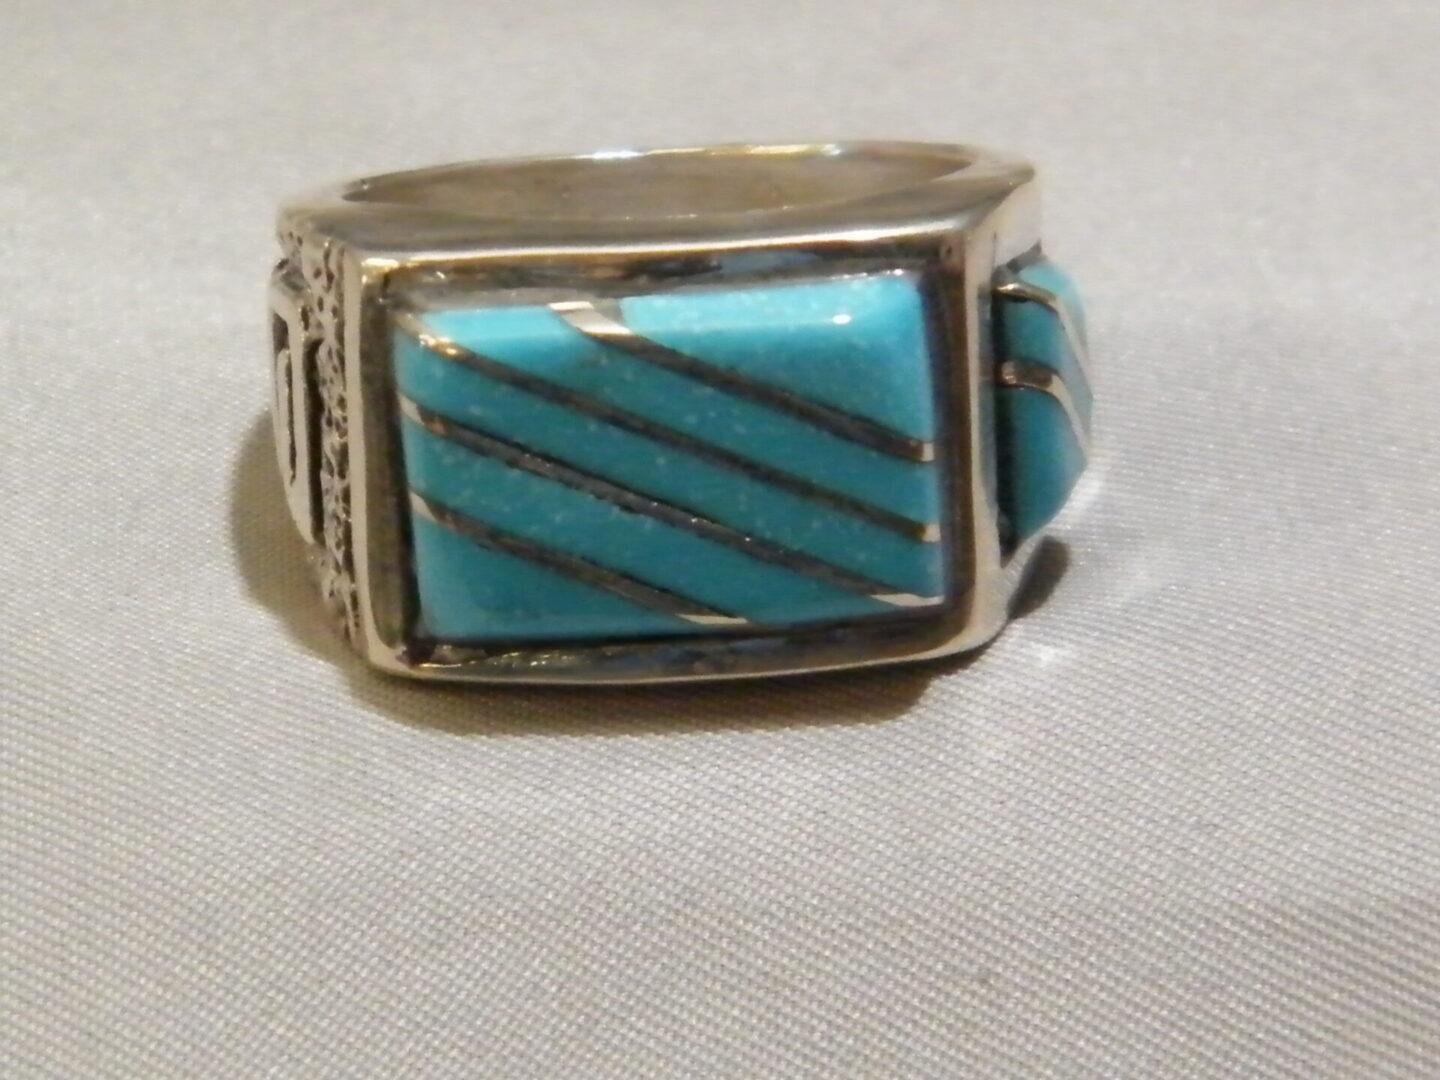 A Silver Color Ring With Blue and Silver Color Stone One